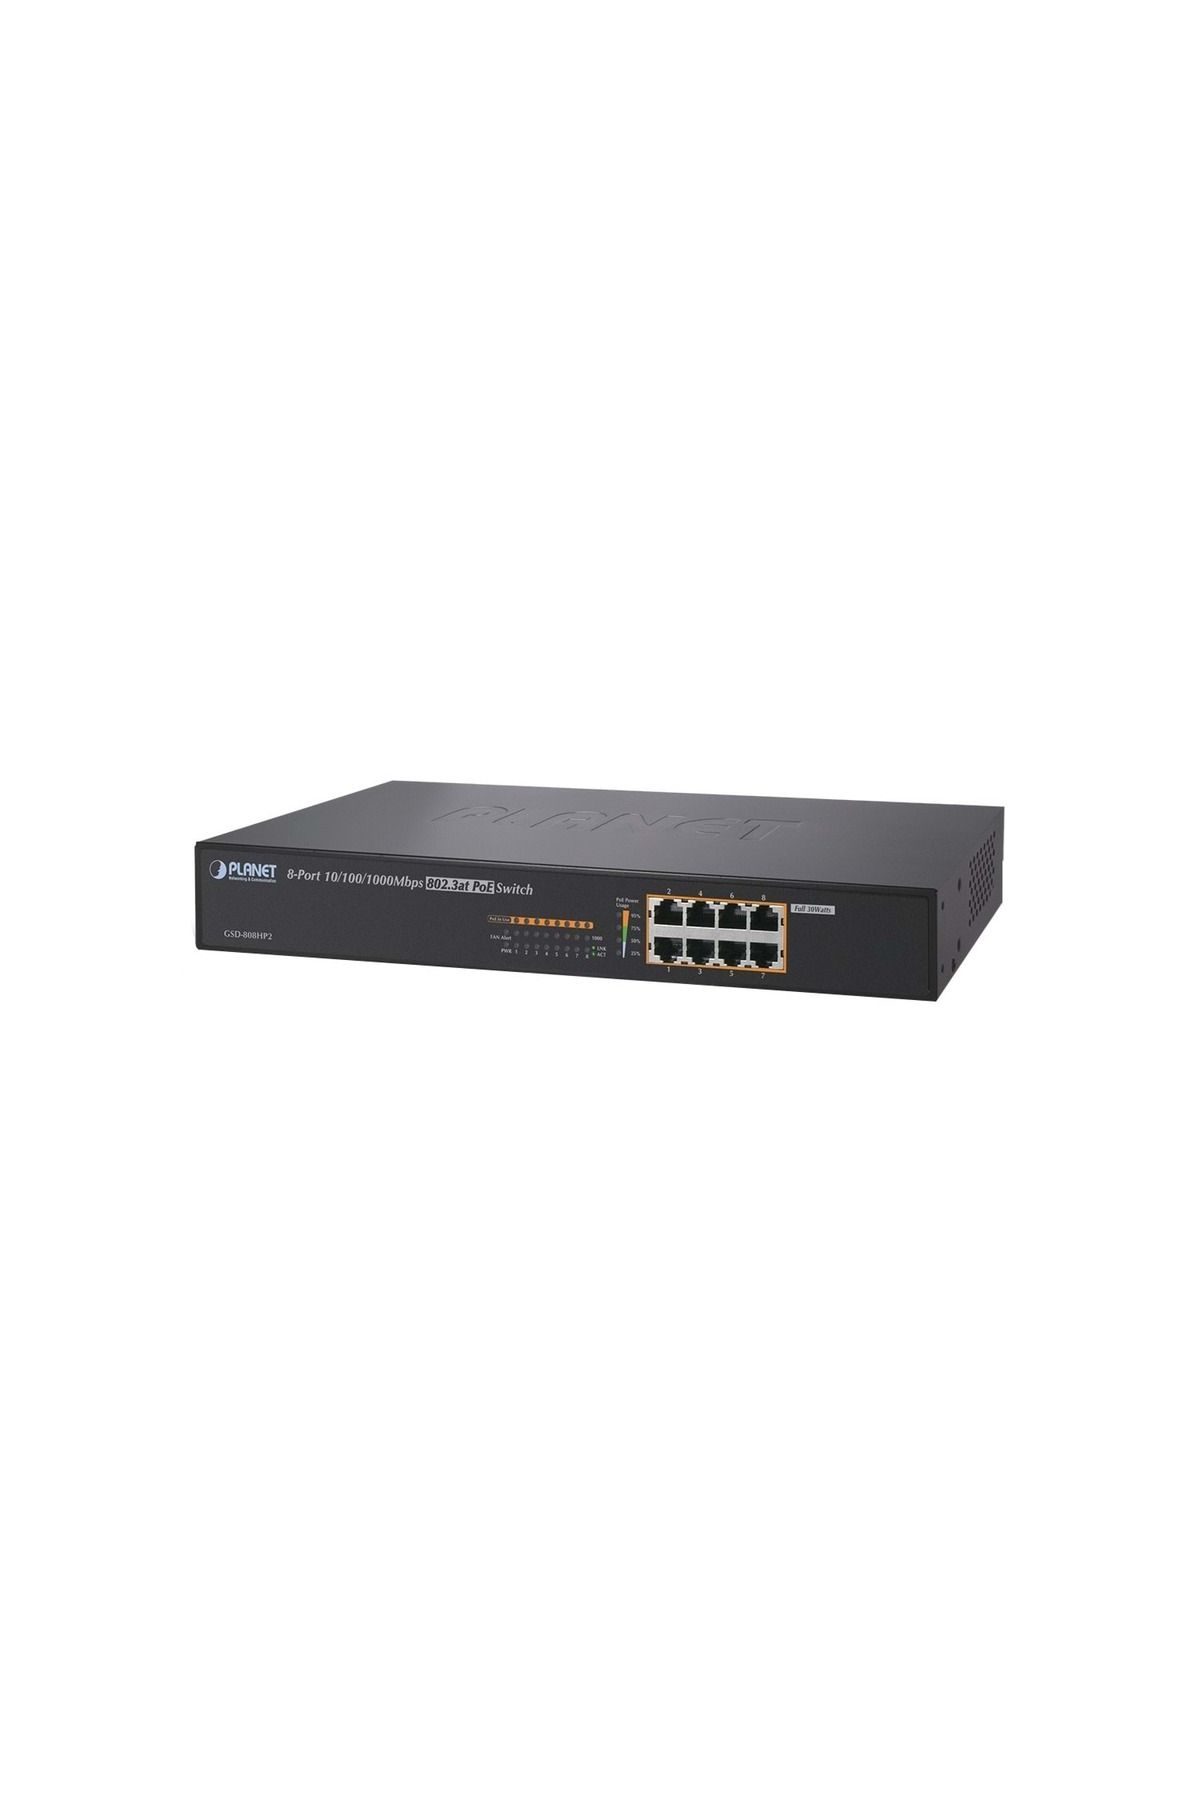 Planet 13" 8-Port 10/100/1000 Gigabit Ethernet Switch with 8-Port 802.3at POE+ (240W POE Budget)